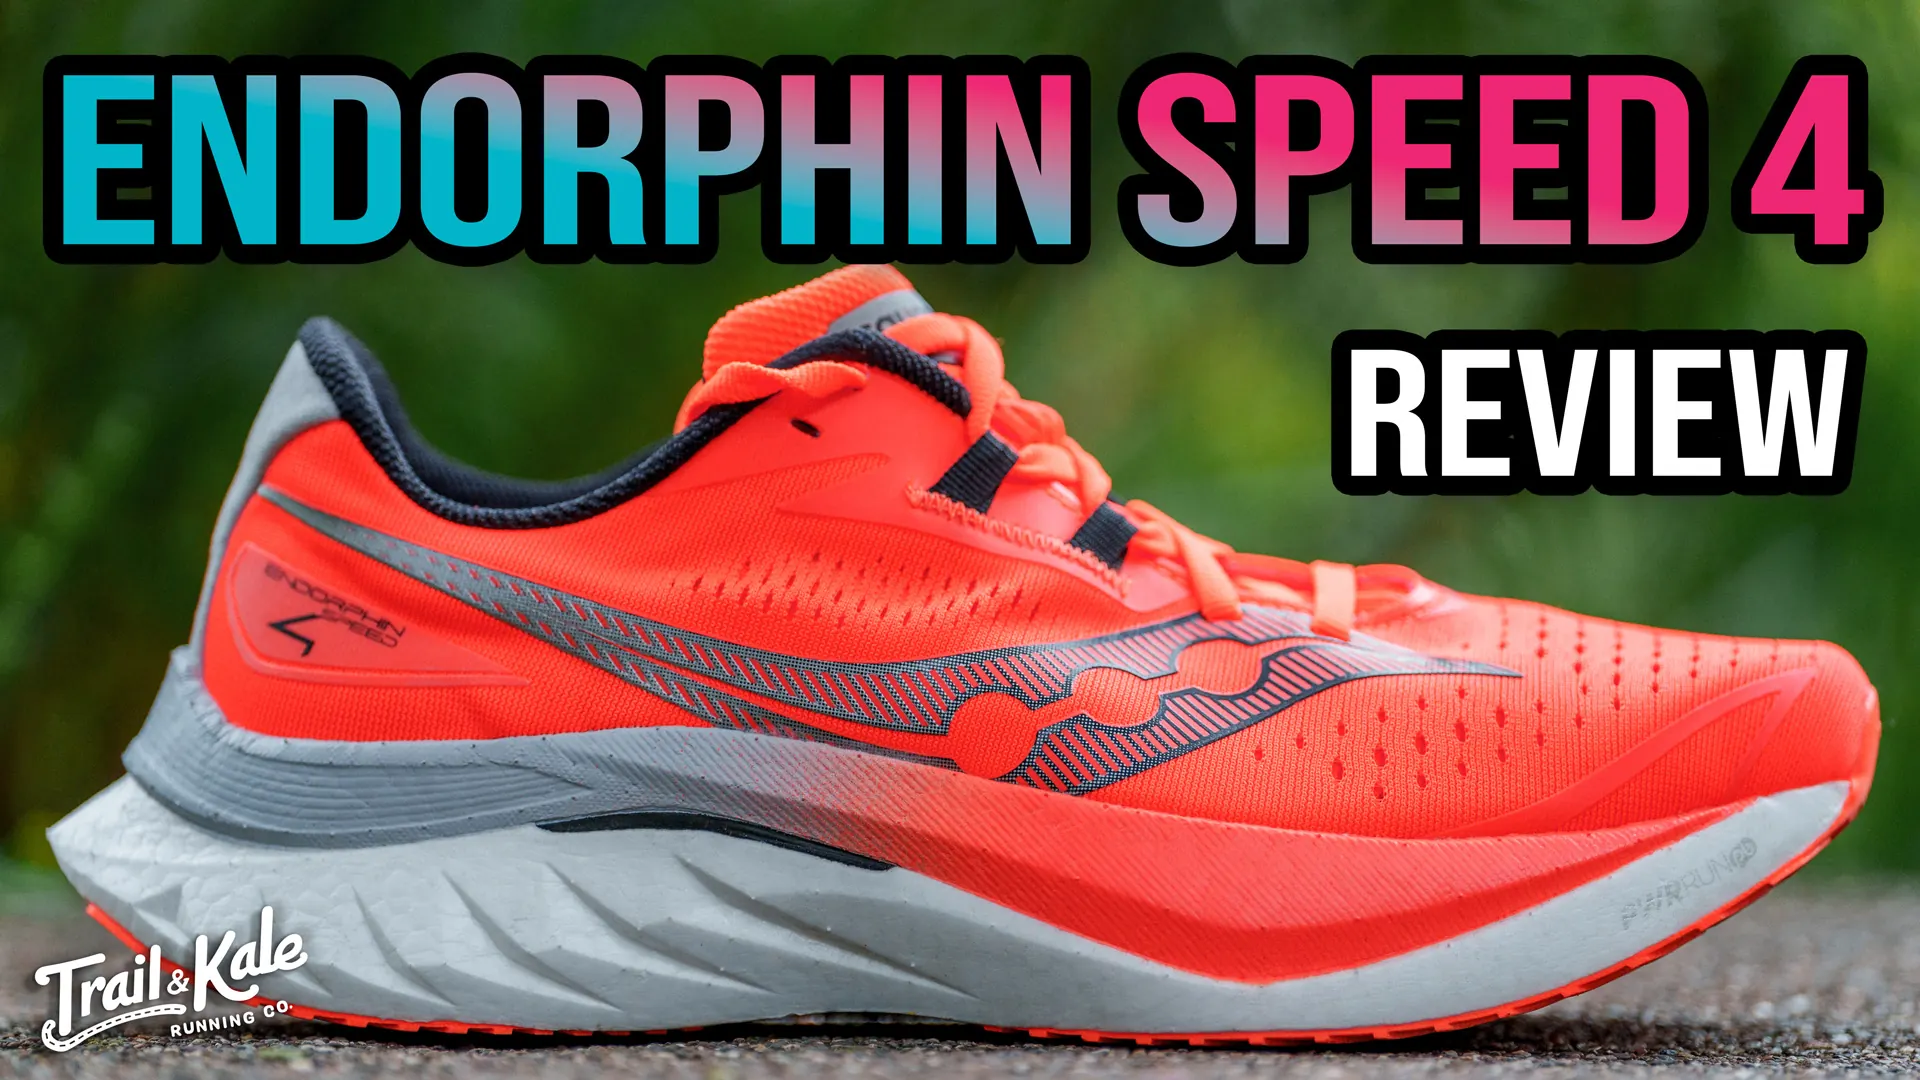 Saucony Endorphin Speed 4 Review: All This For $170, Really?! 6 - Trail and Kale | Trail Running & Adventure